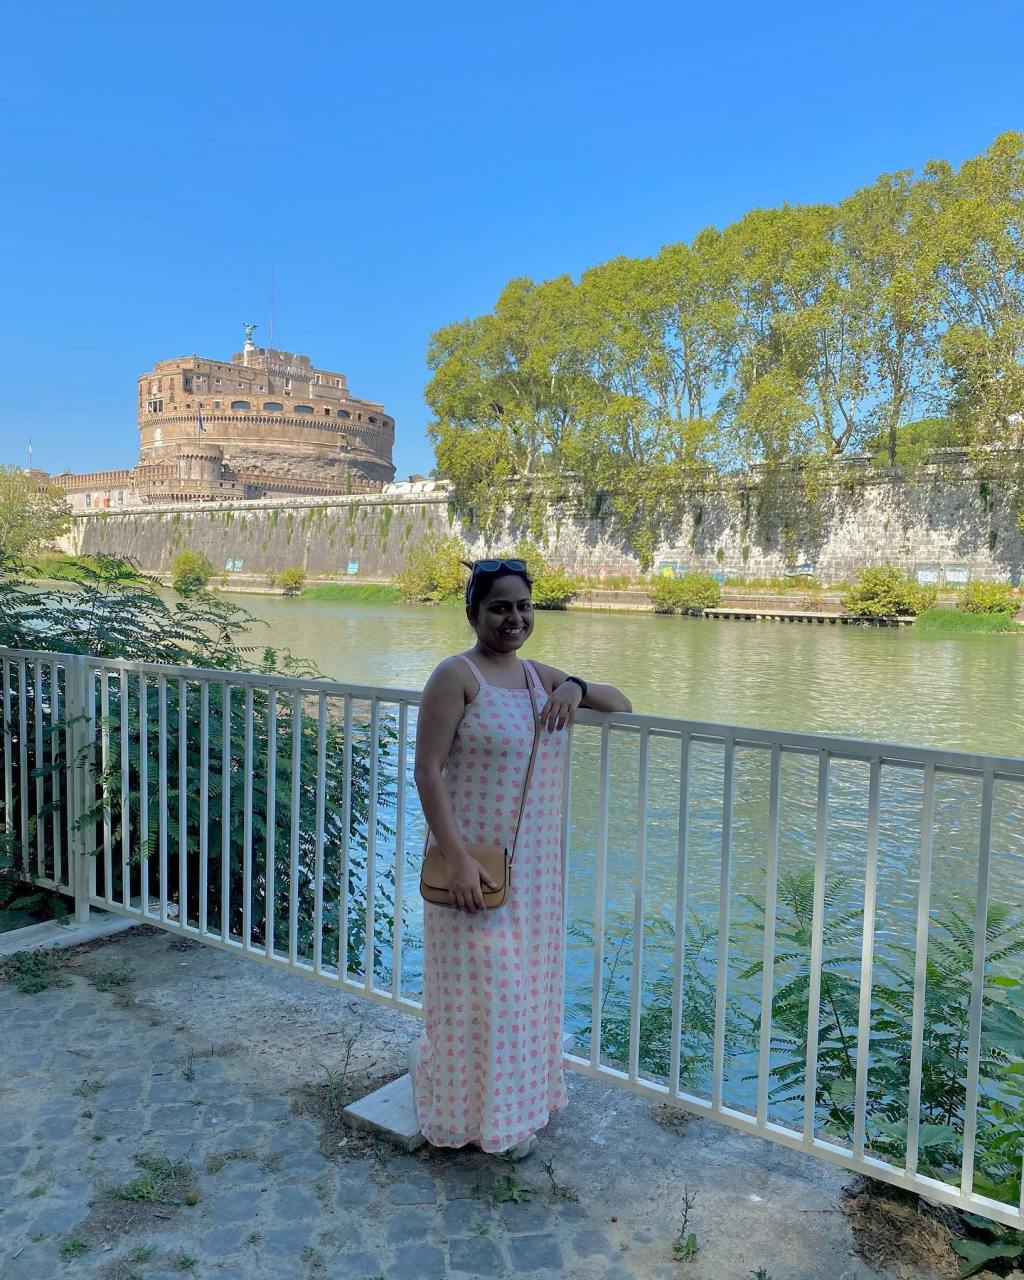 Roma, amor – you will be missed!